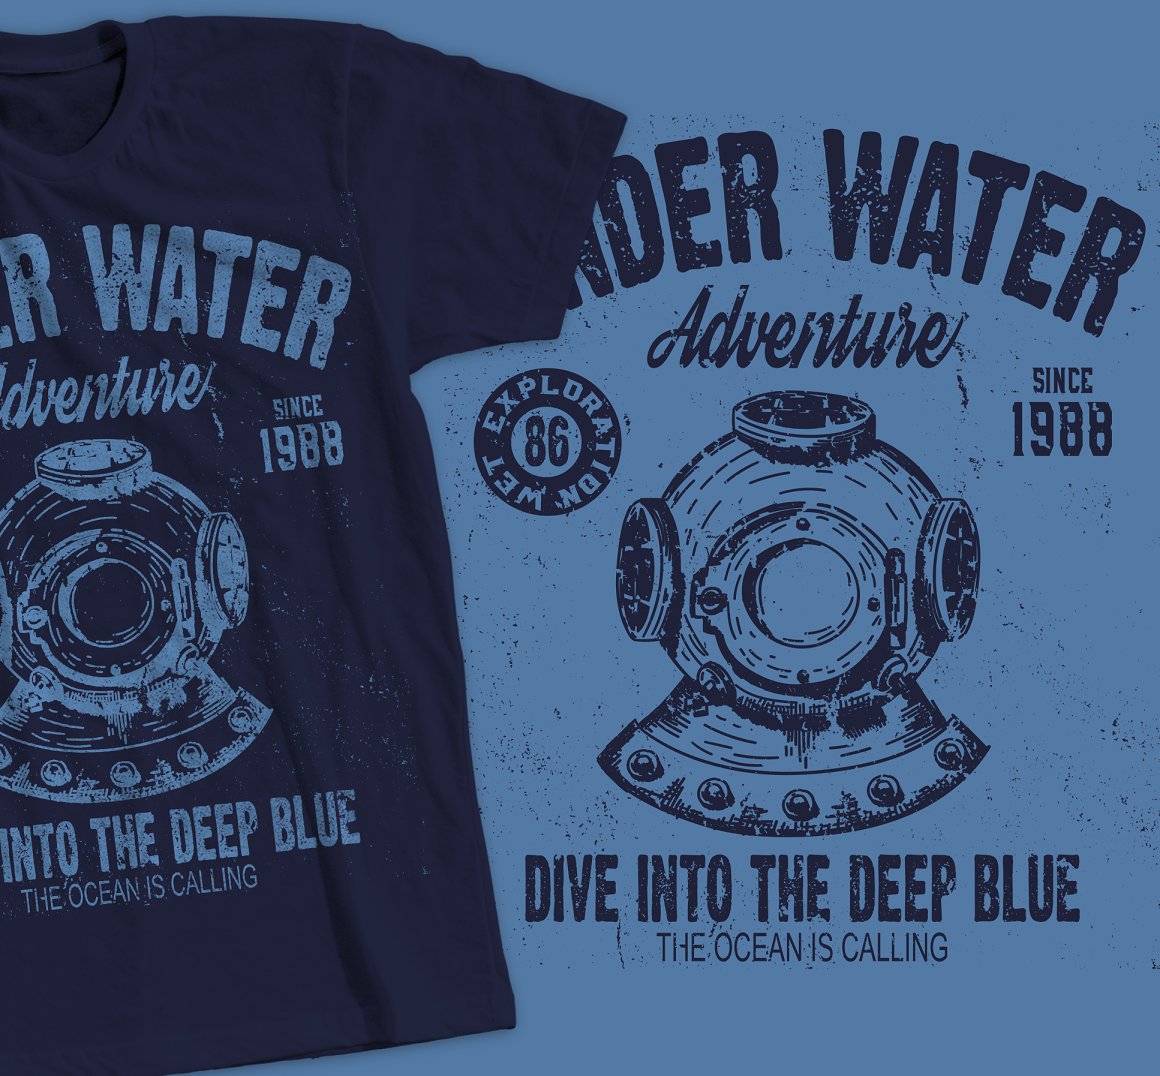 Blue image with the lettering "Under water adventure dive into the deep blue the ocean is calling" on dark blue t-shirt and dark blue same image with lettering on a blue background Cover.